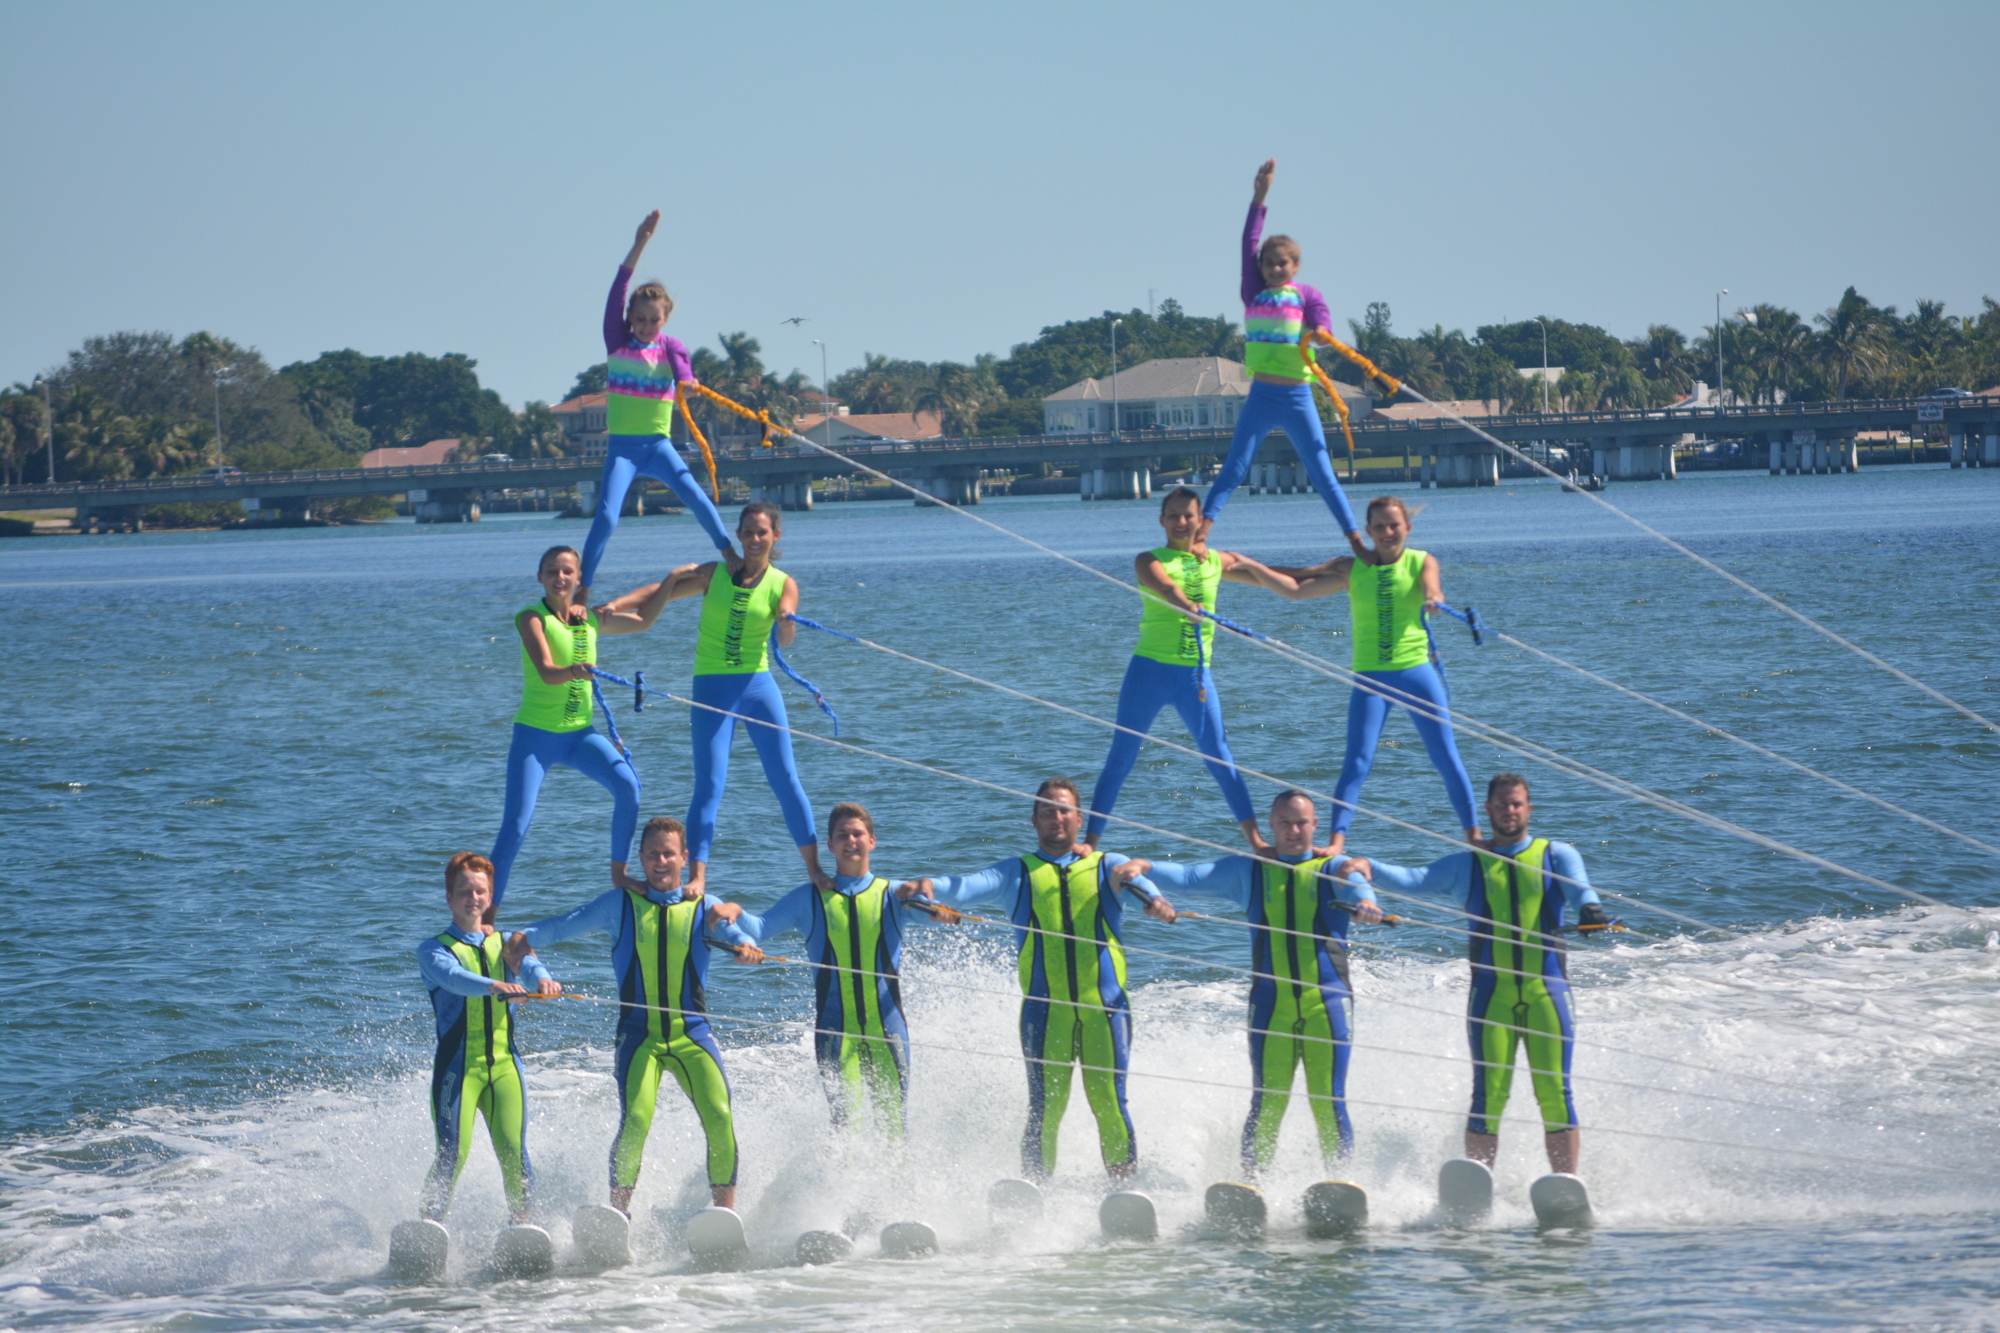 The Sarasota Ski-A-Rees form twin pyramids during their show on Oct. 23.